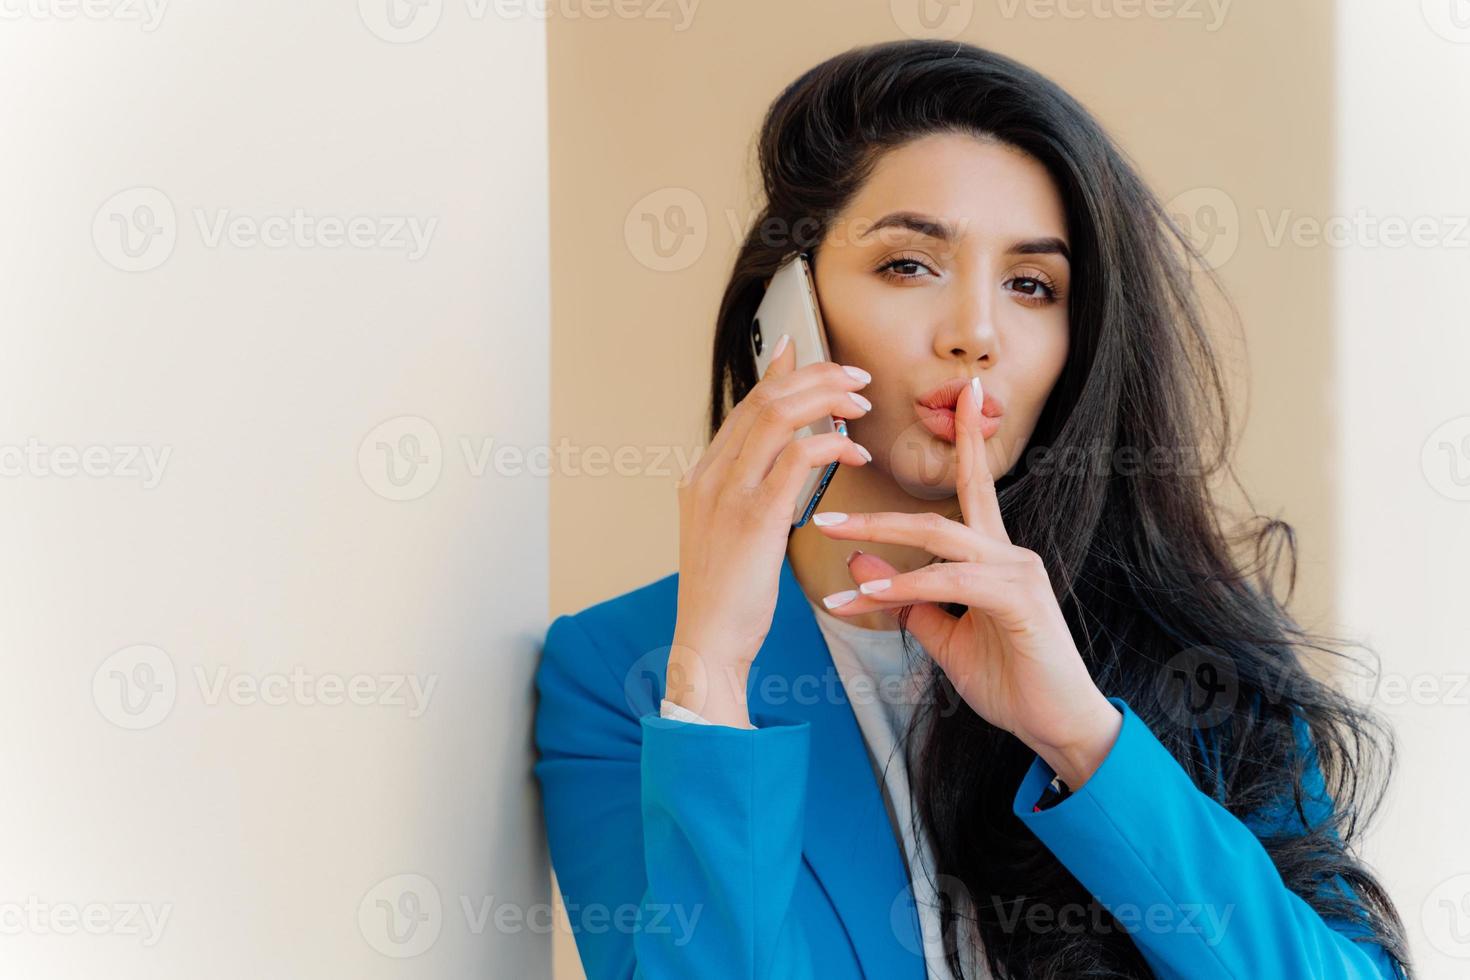 Mysterious brunette woman with makeup, talks with business party, tells secret, makes silent gesture, looks straightly at camera, wears formal apparel. People, communication and conspiracy concept photo